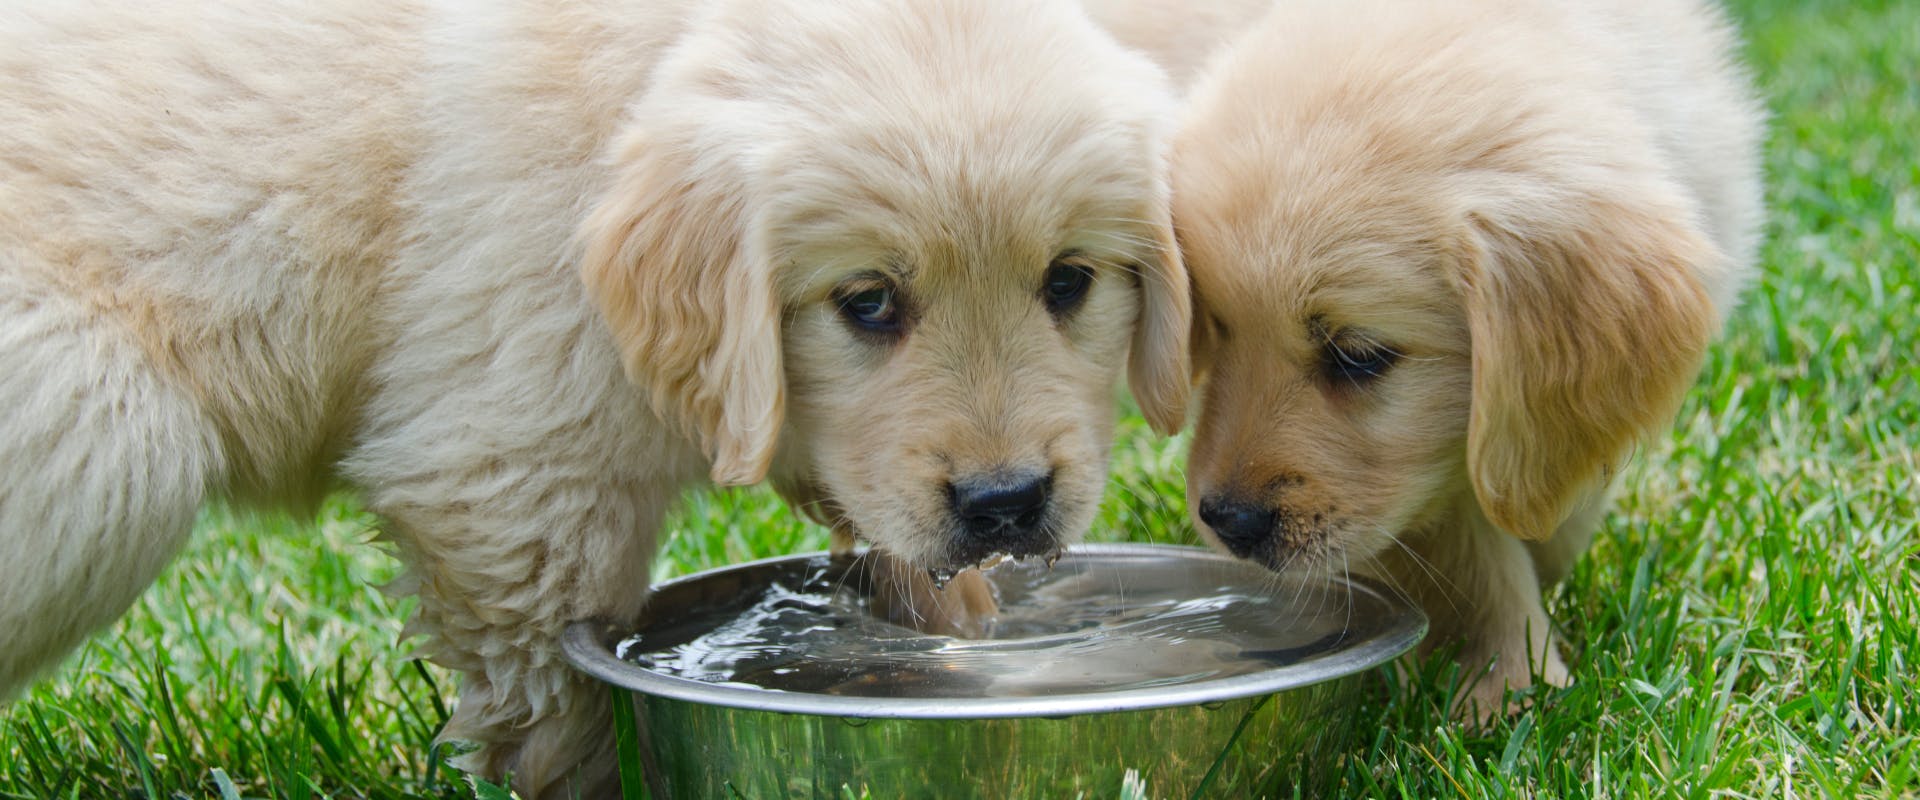 Two puppies drinking water from a bowl.